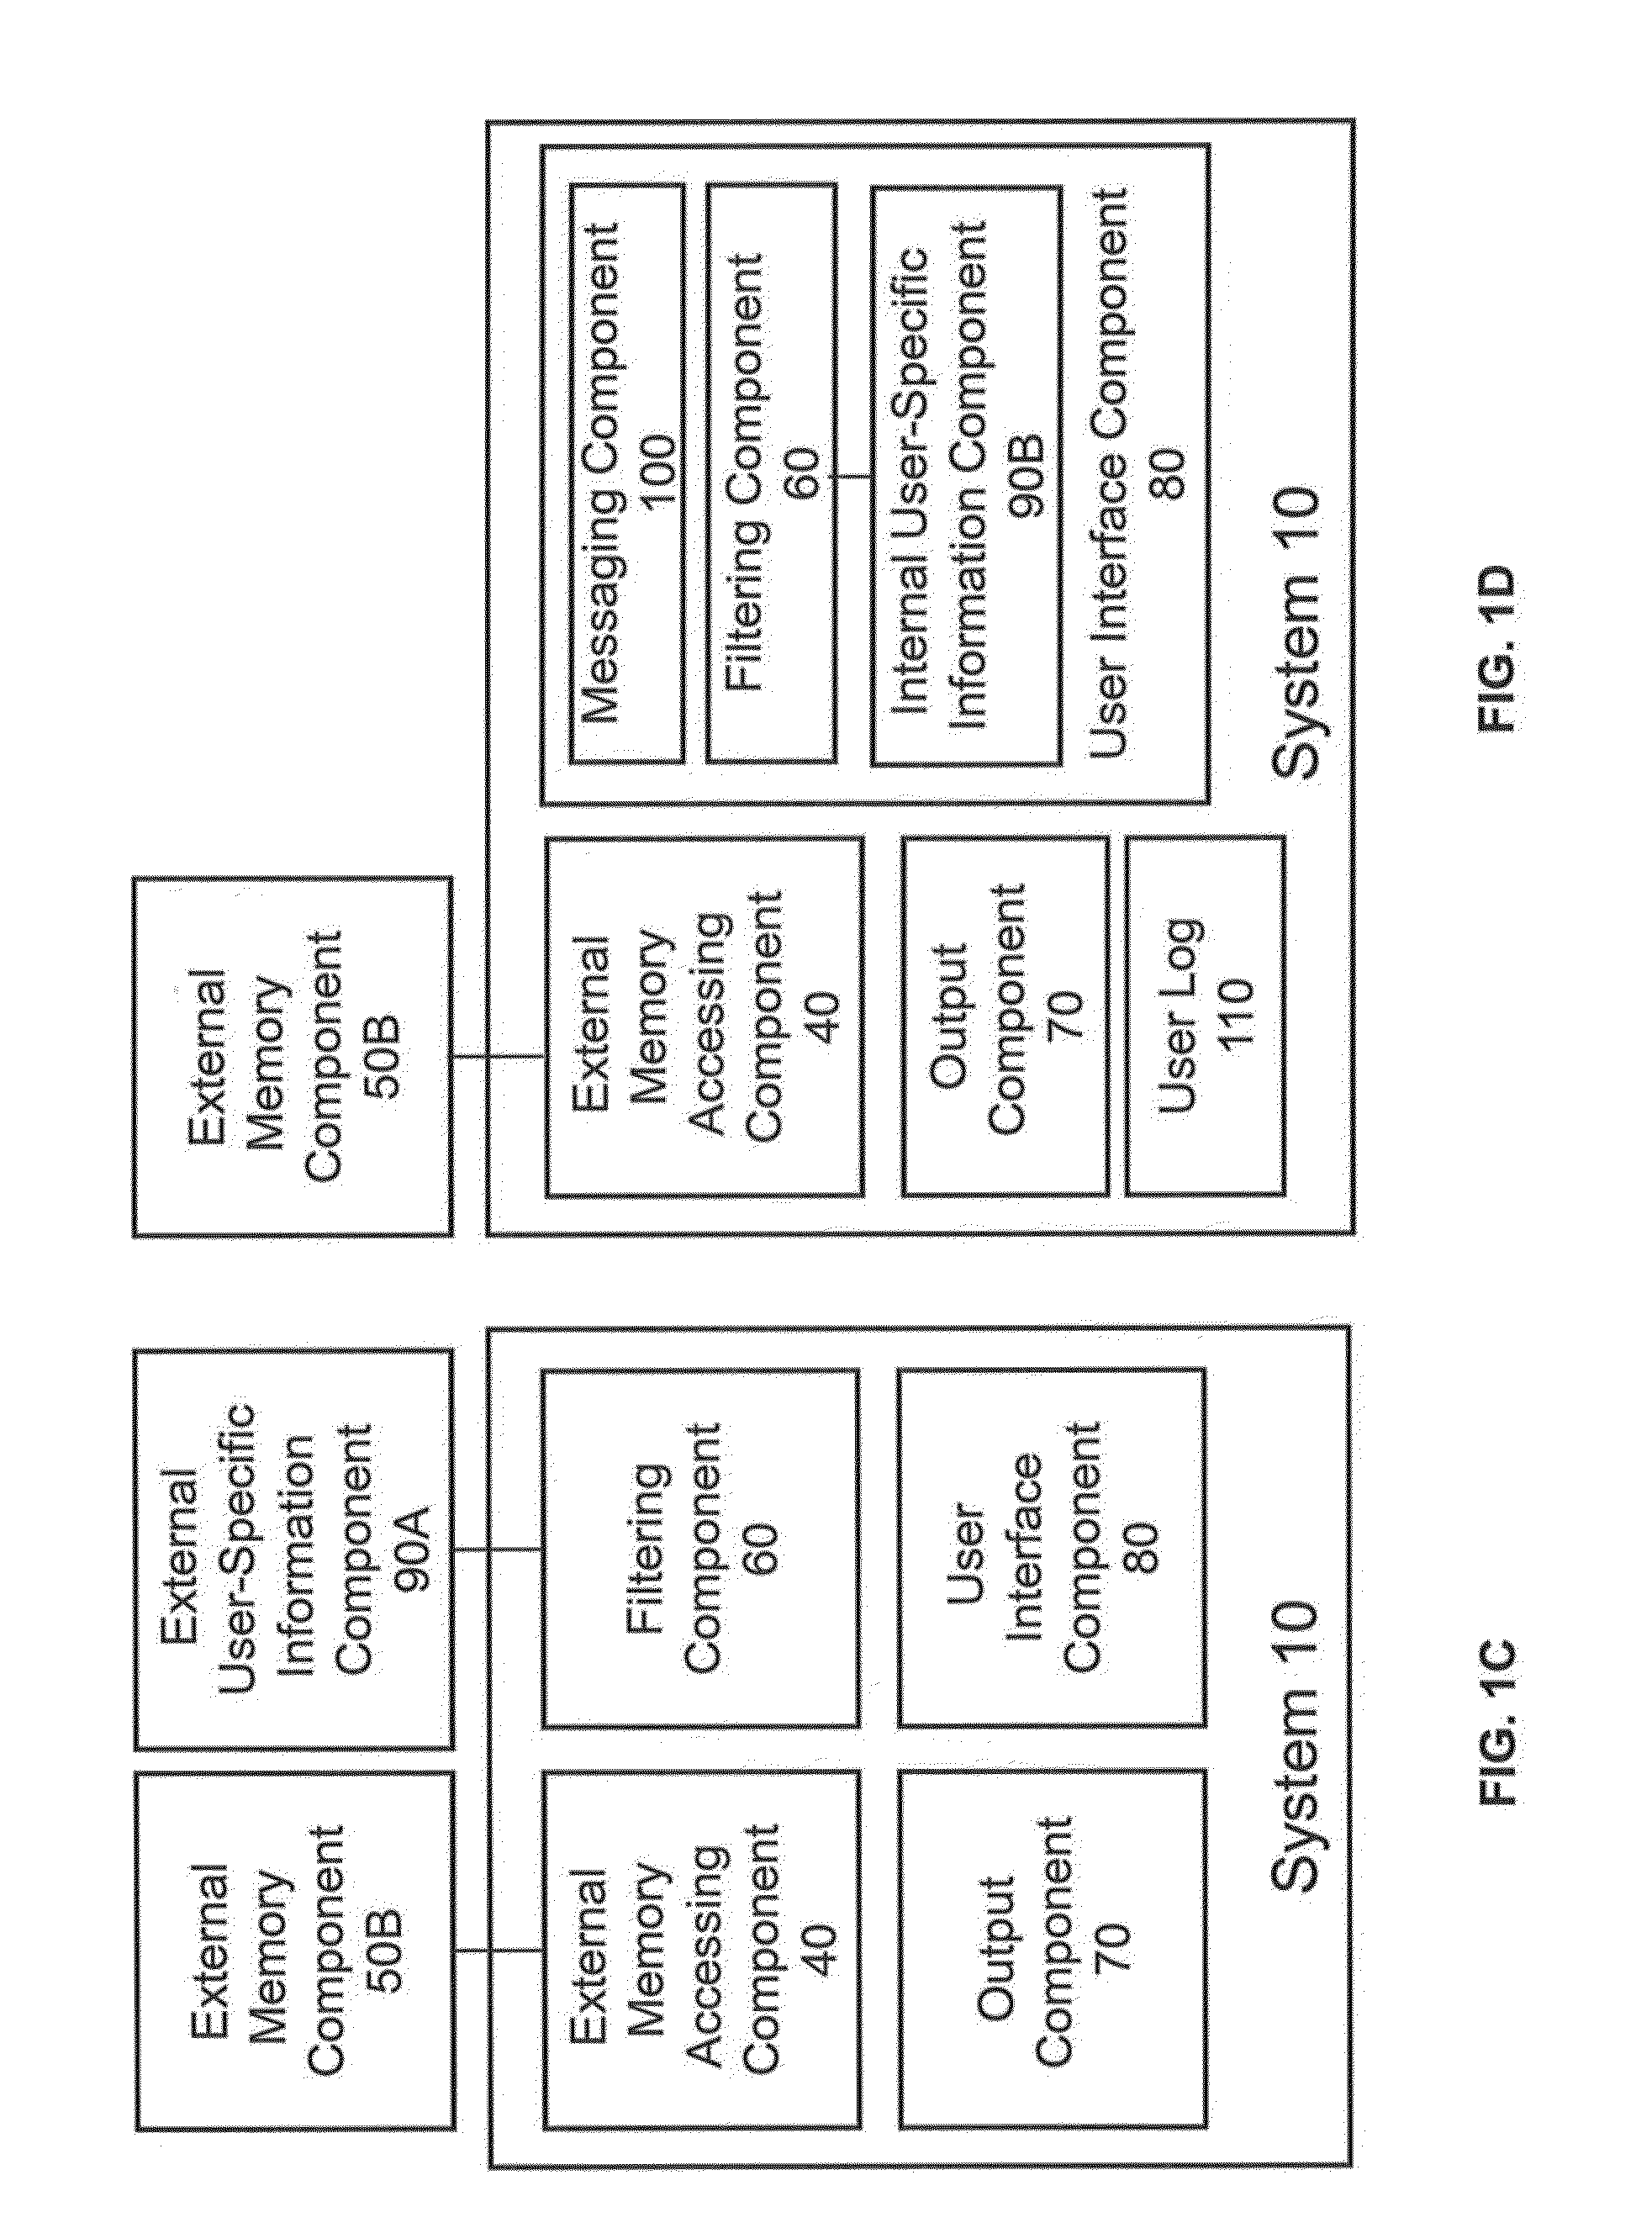 System and methods for monitoring and adjusting human behavioral patterns and conditions